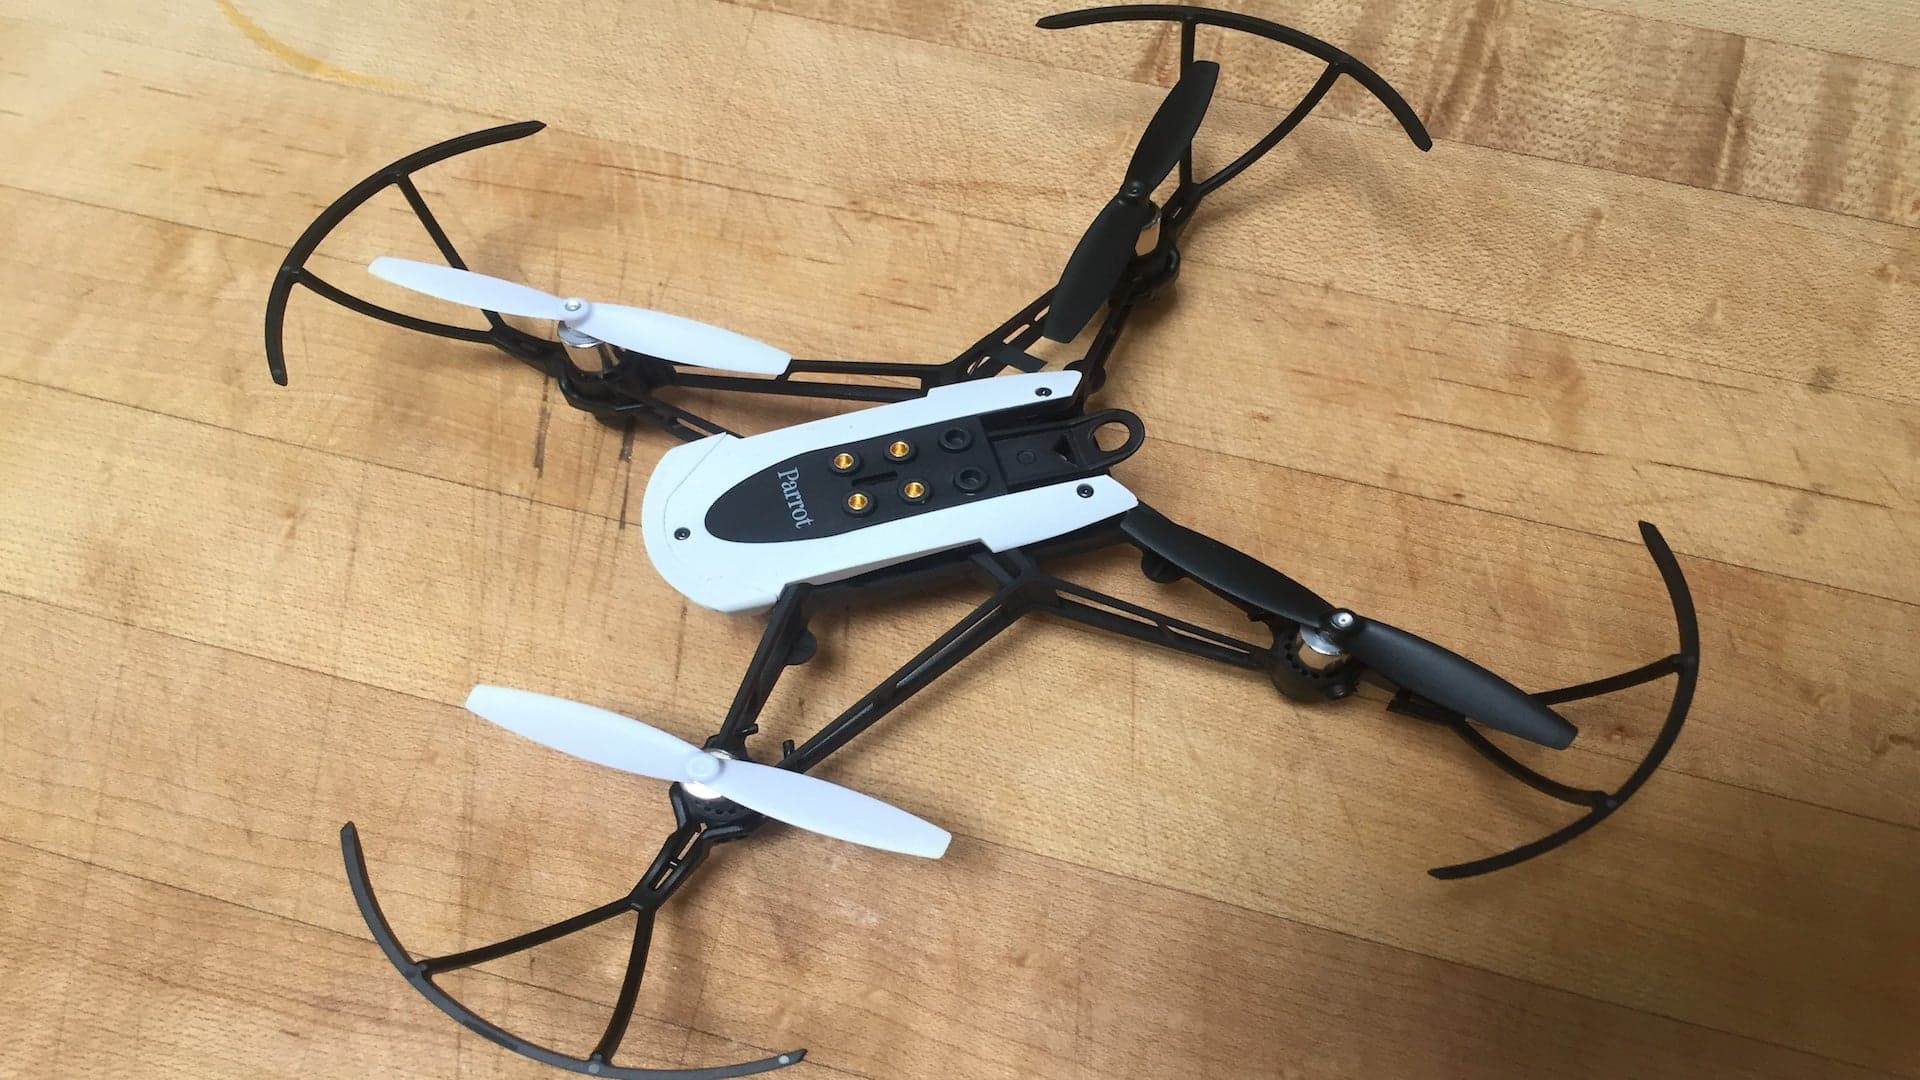 The Parrot Mambo Drone Is Extremely Addictive